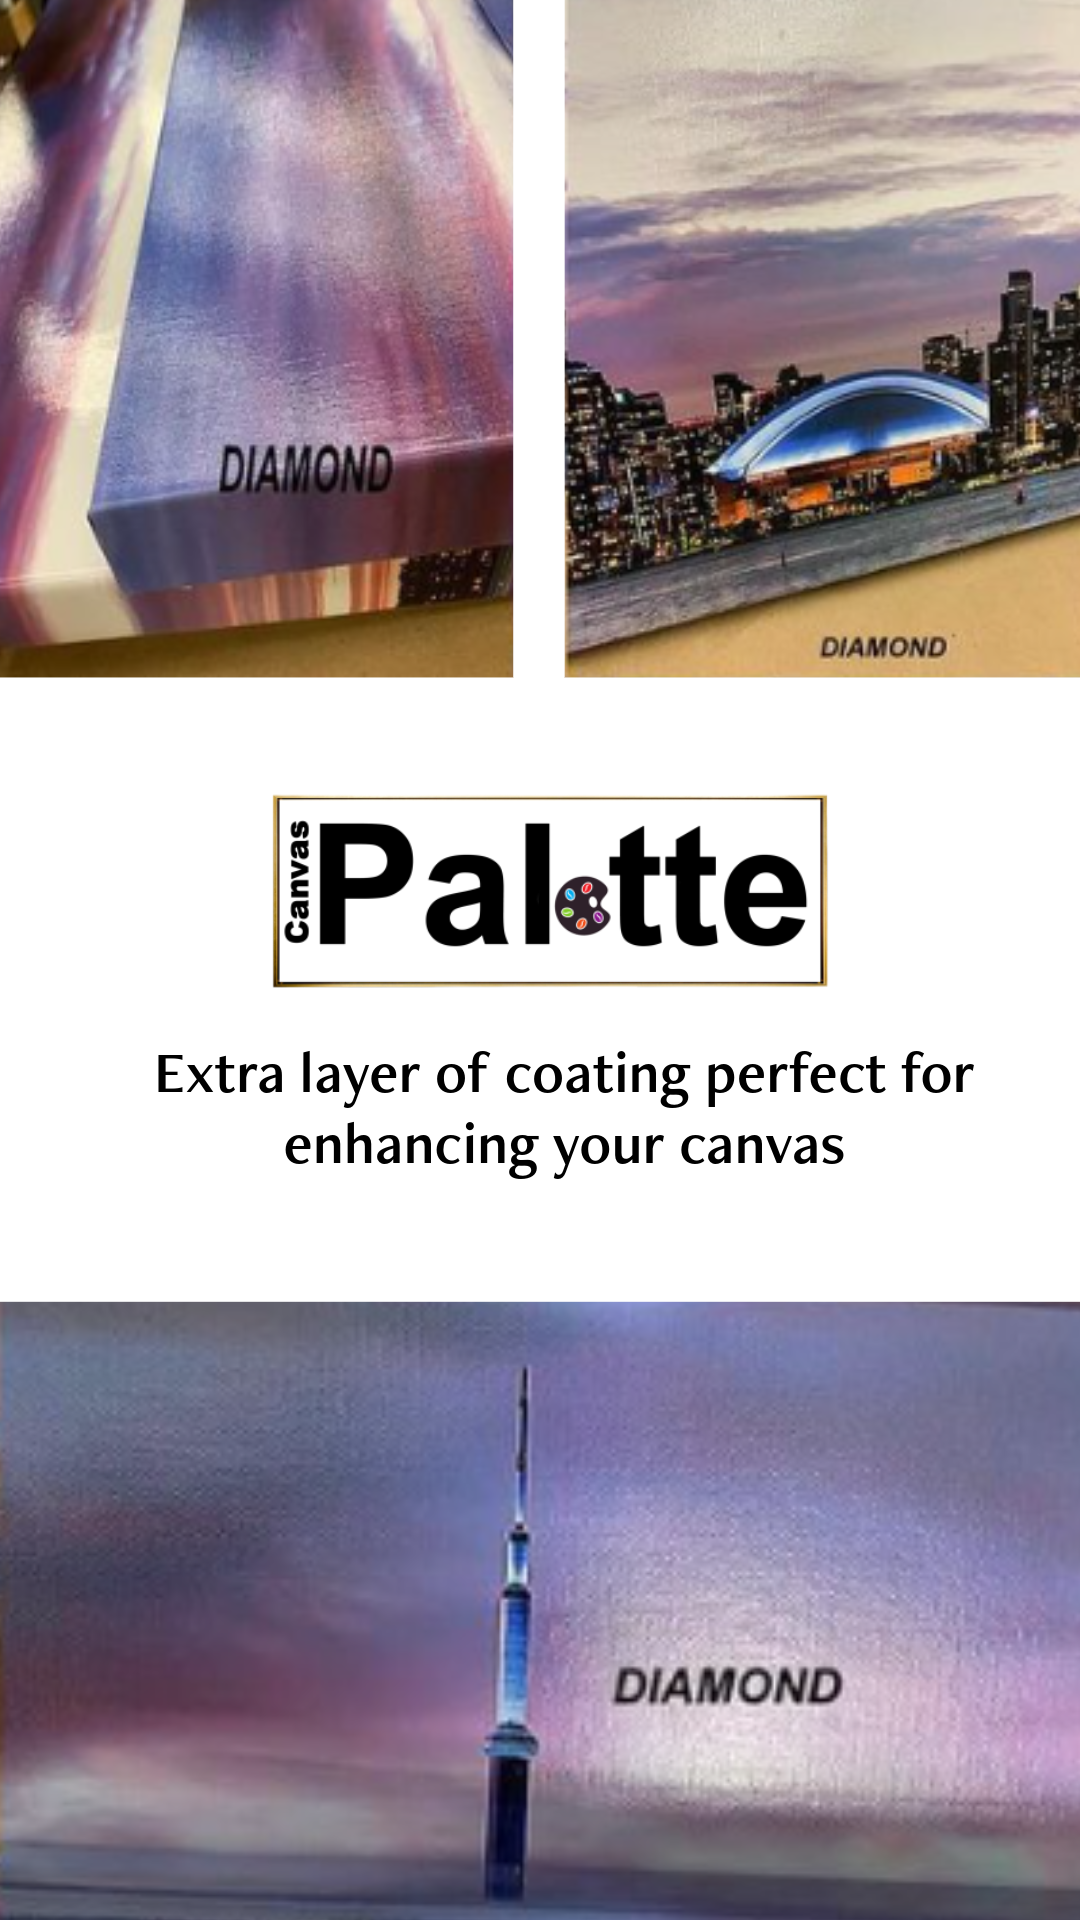 Diamond coating samples for canvas only at CanvasPallet.com in medium sizes